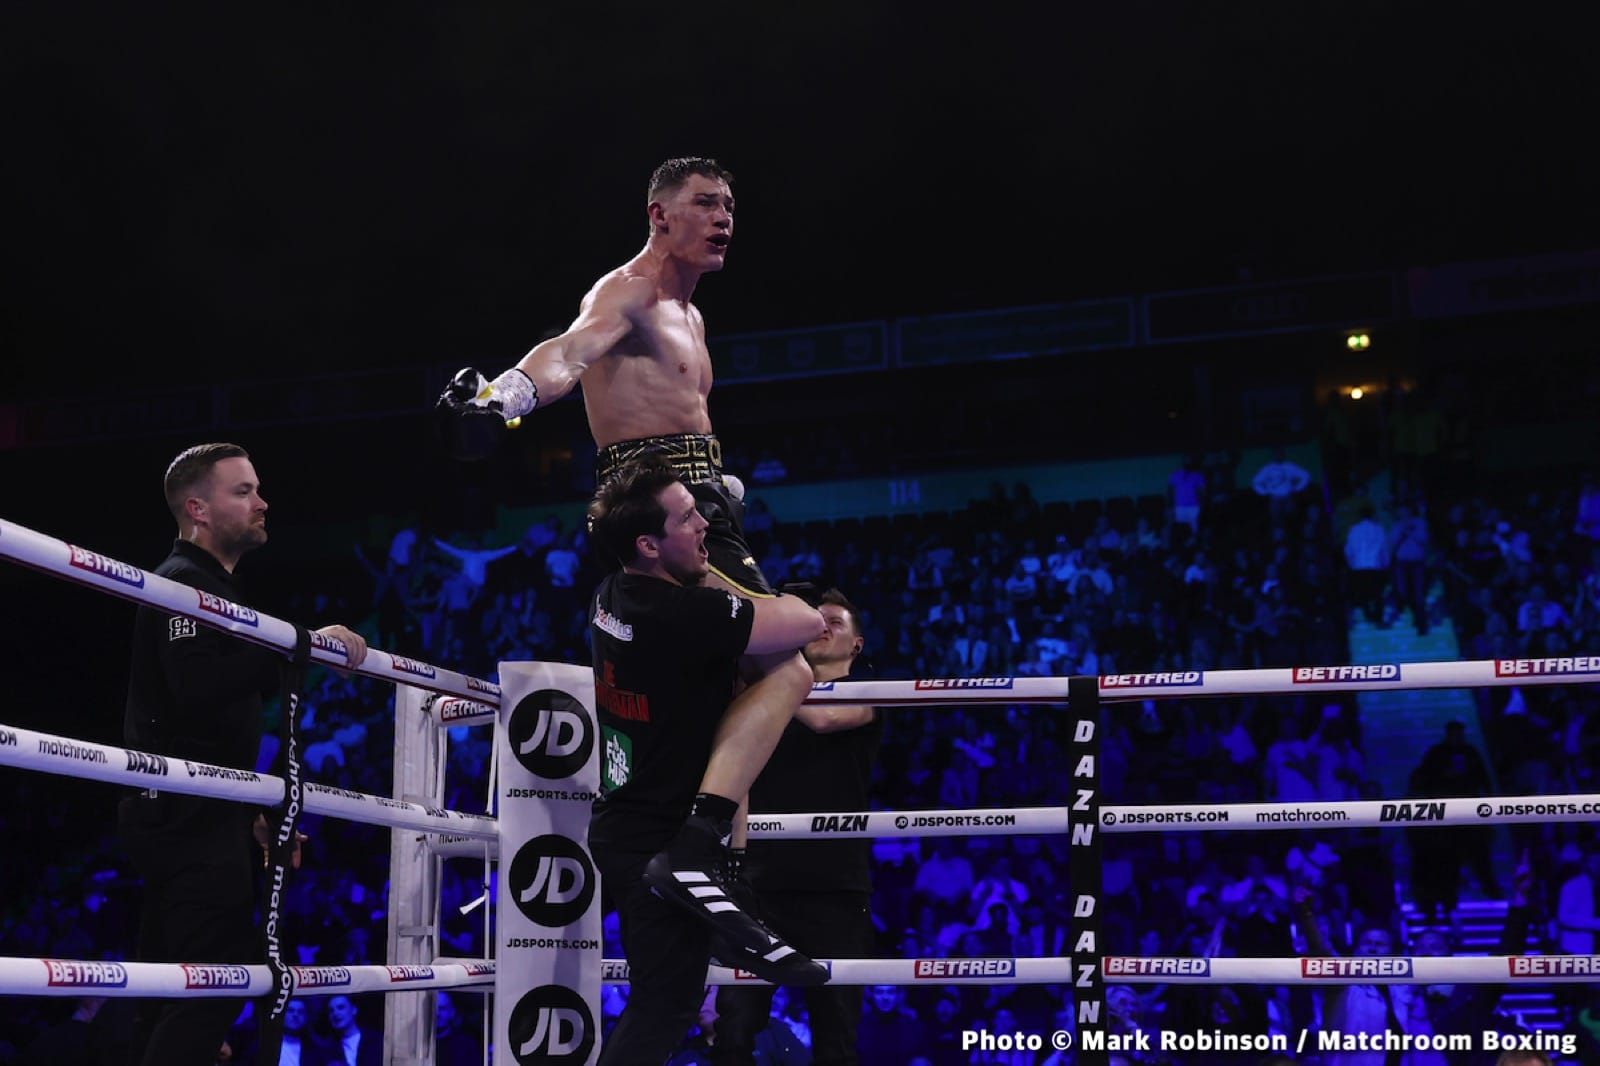 Image: Boxing Results: Conor “The Destroyer” Benn Stopped Van Heerden!